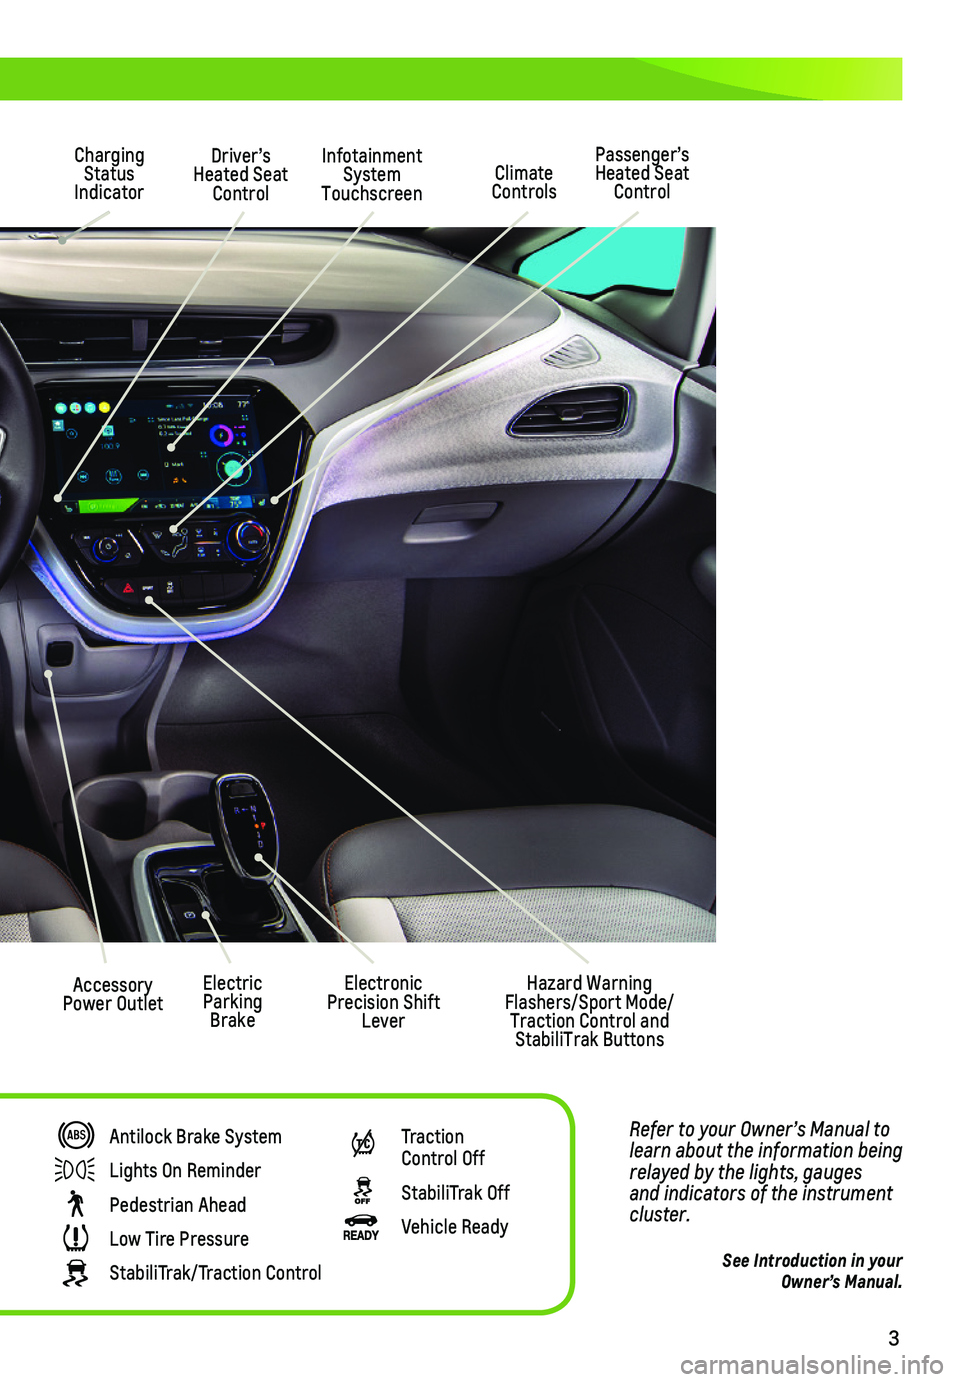 CHEVROLET BOLT EV 2020  Get To Know Guide 3
Refer to your Owner’s Manual to learn about the information being relayed by the lights, gauges and indicators of the instrument cluster.
See Introduction in your  Owner’s Manual.
Driver’s Hea